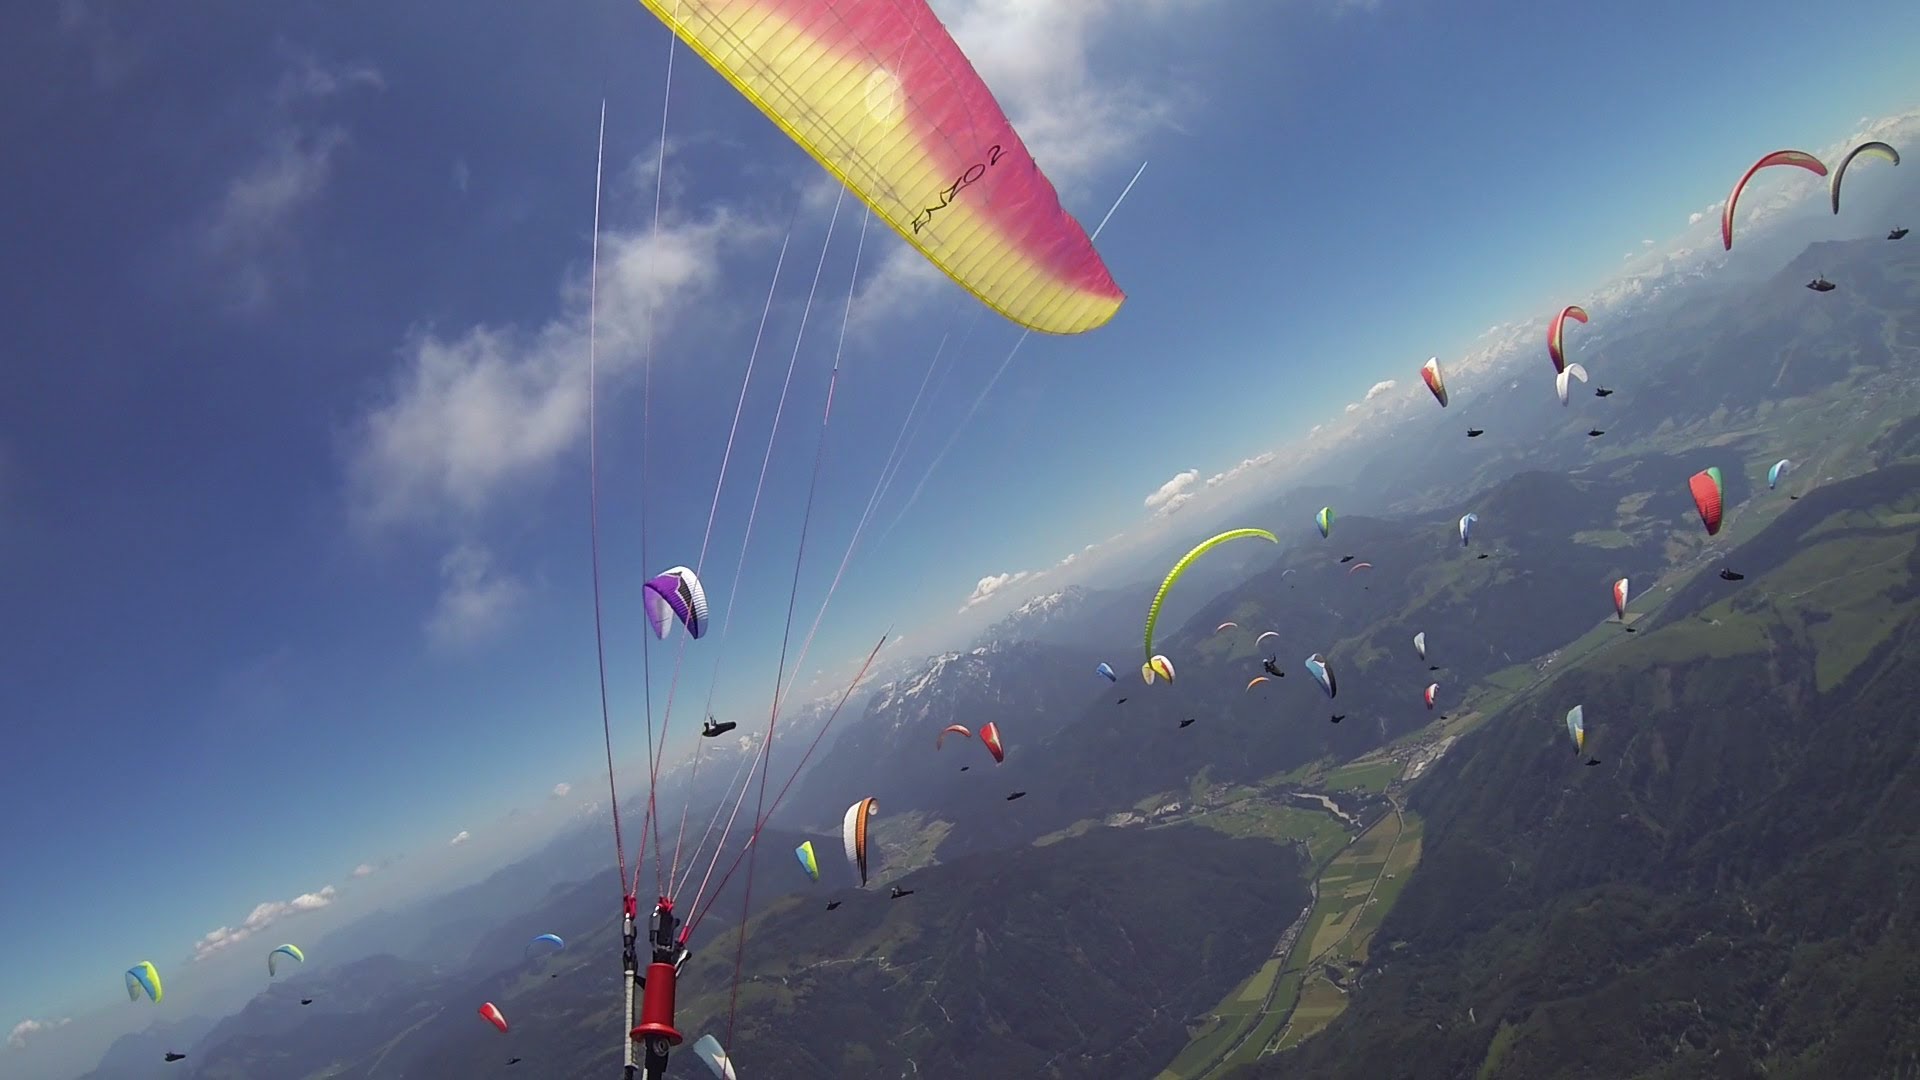 Busy race start with 120 pilots at paragliding competition - YouTube